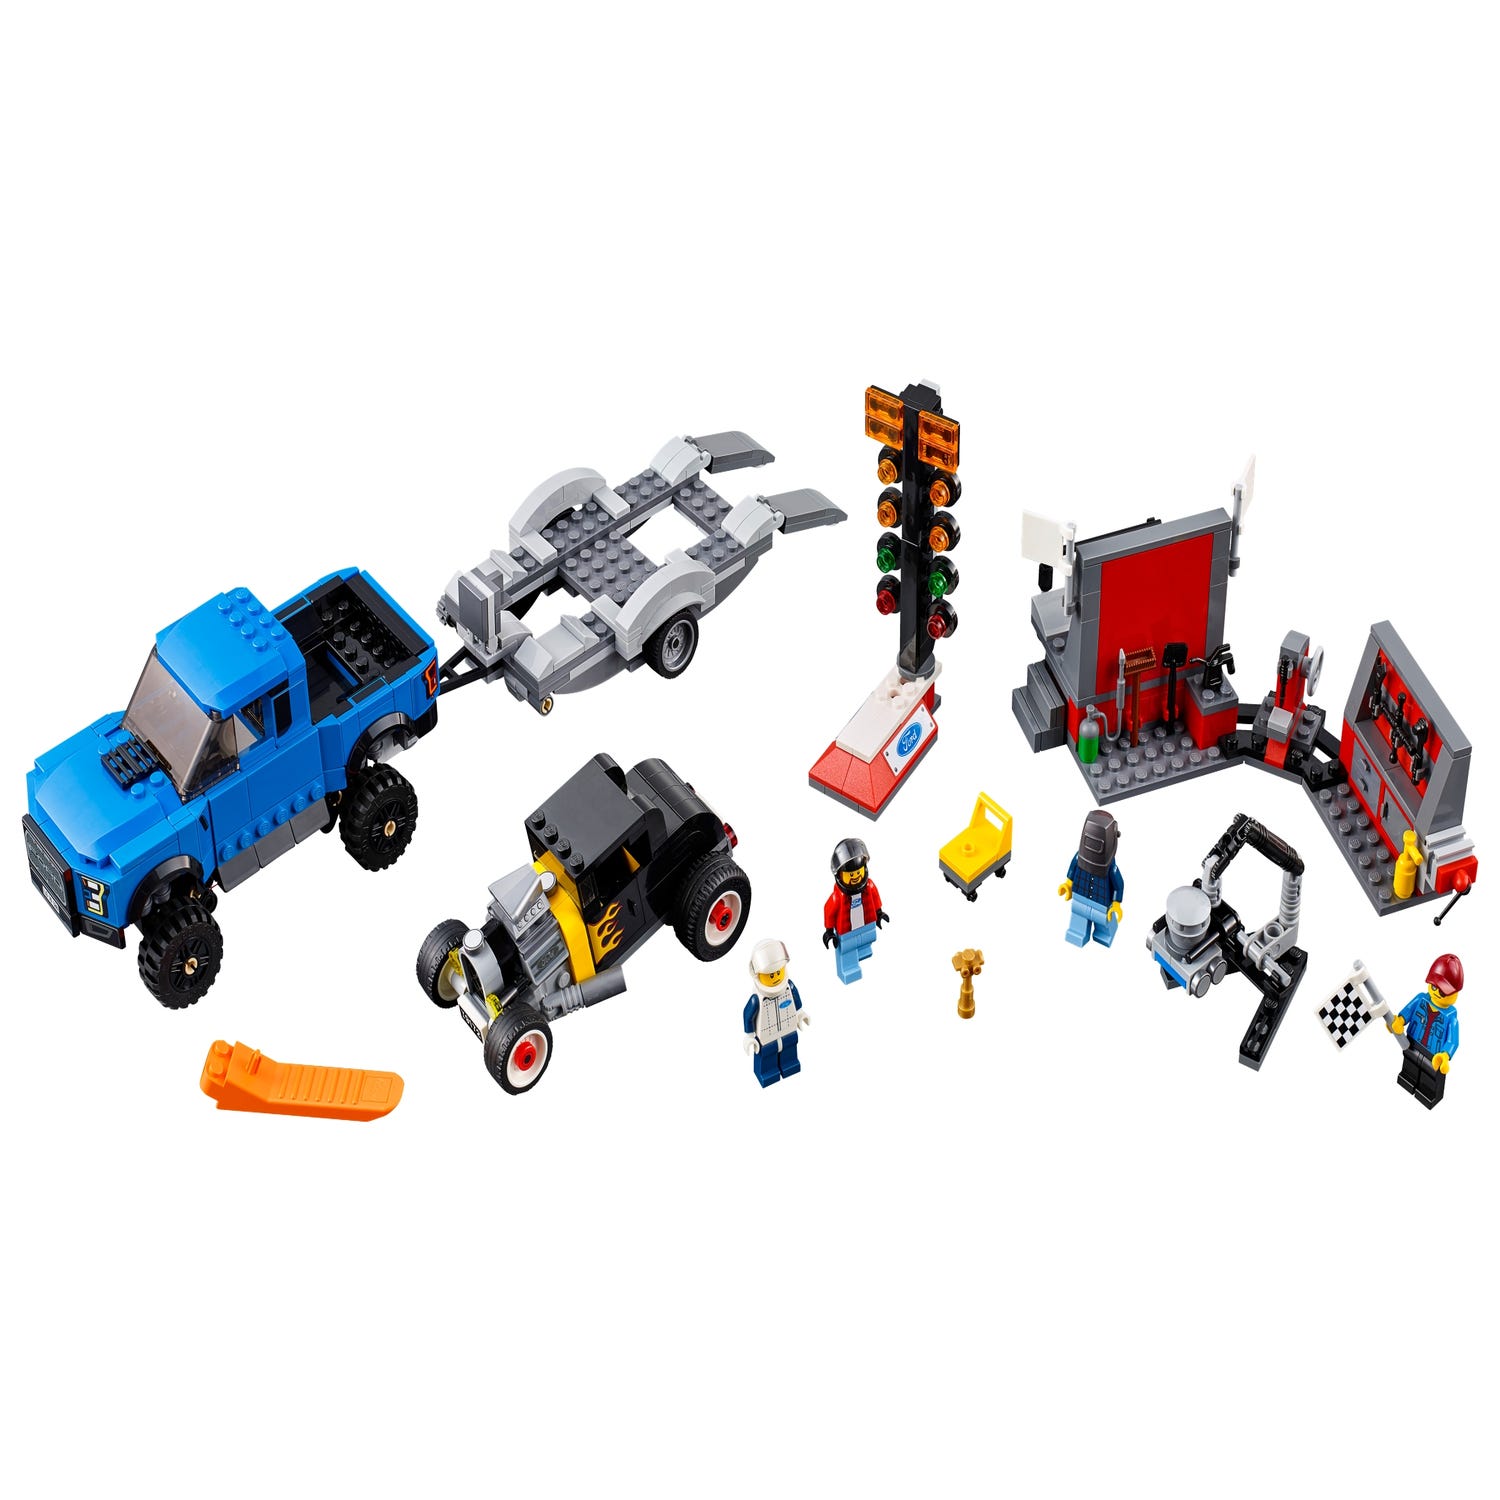 Ford F-150 Raptor & Model A Hot Rod 75875 | Speed Champions | Buy online at the Official LEGO® Shop US